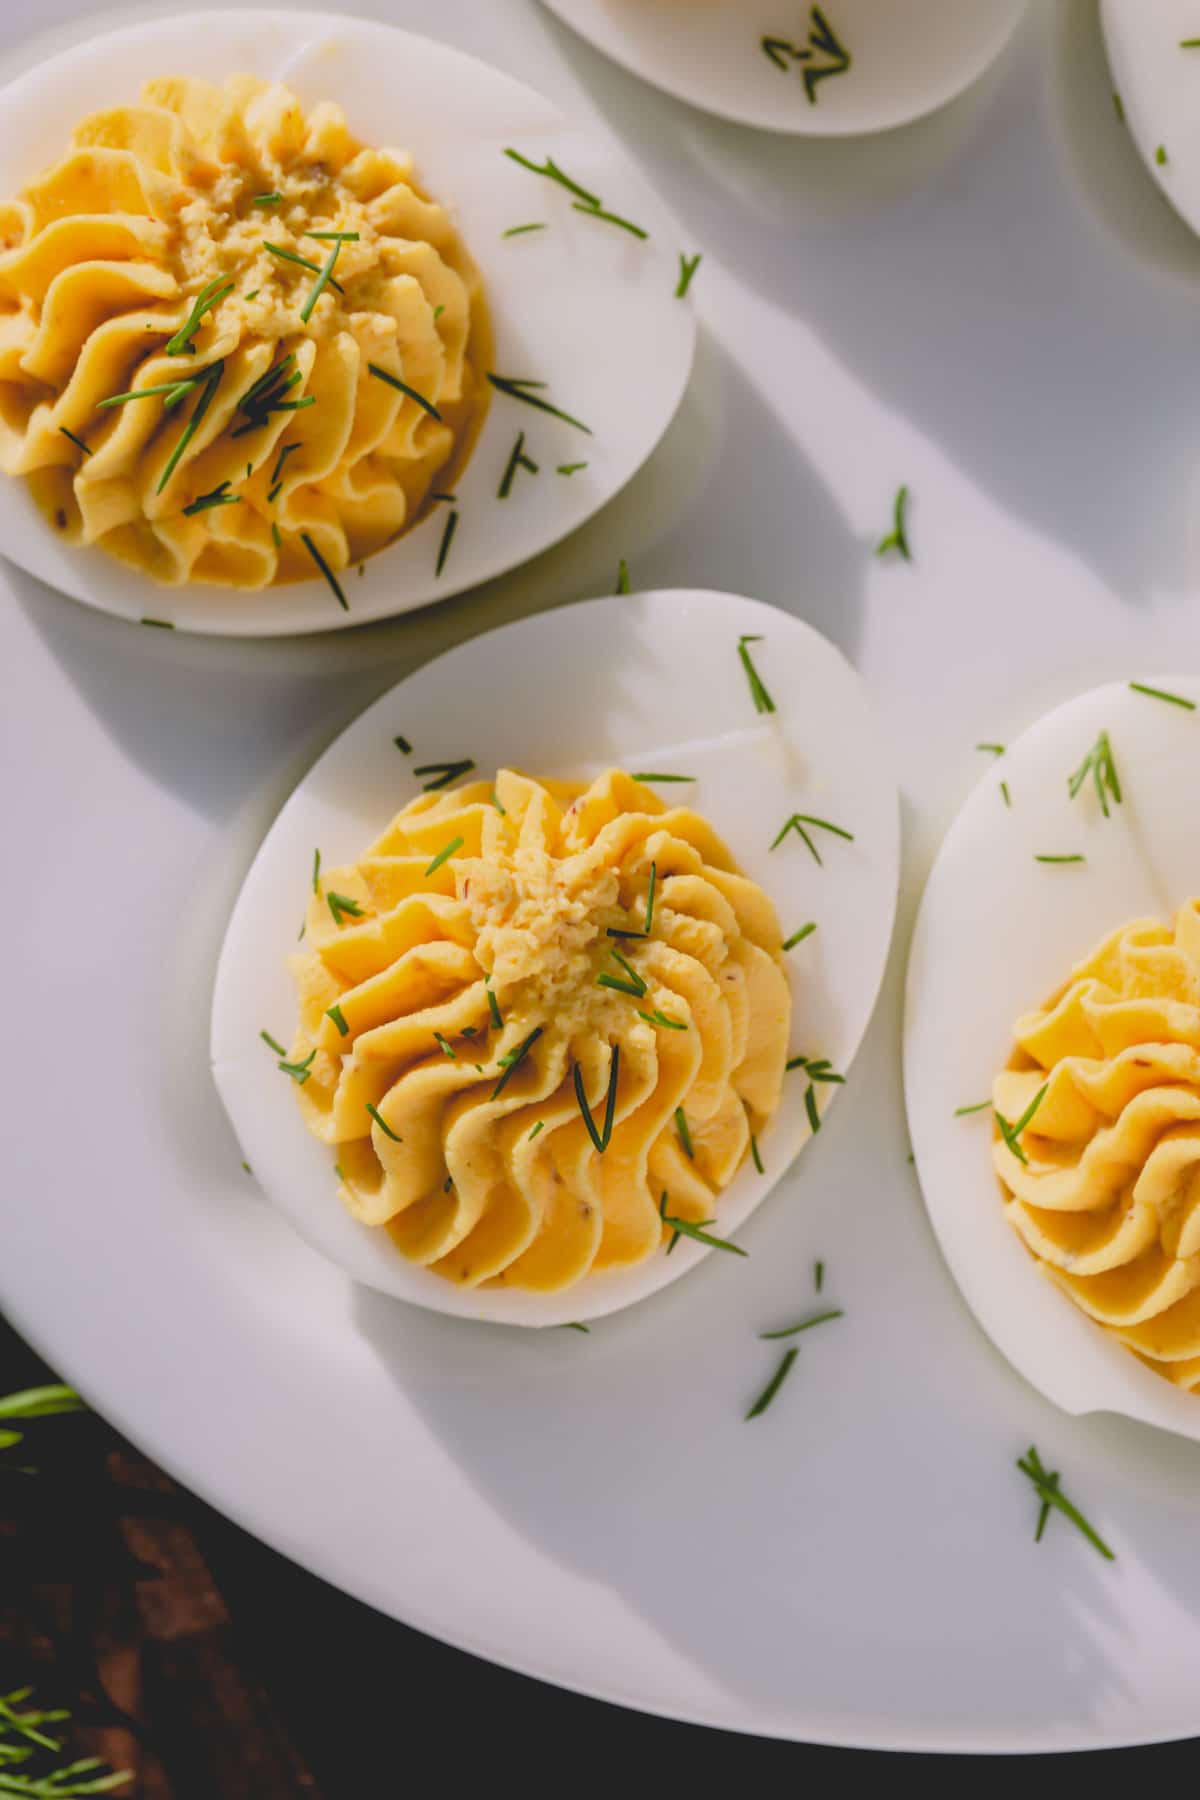 Classic deviled eggs garnished with dill on a white platter.